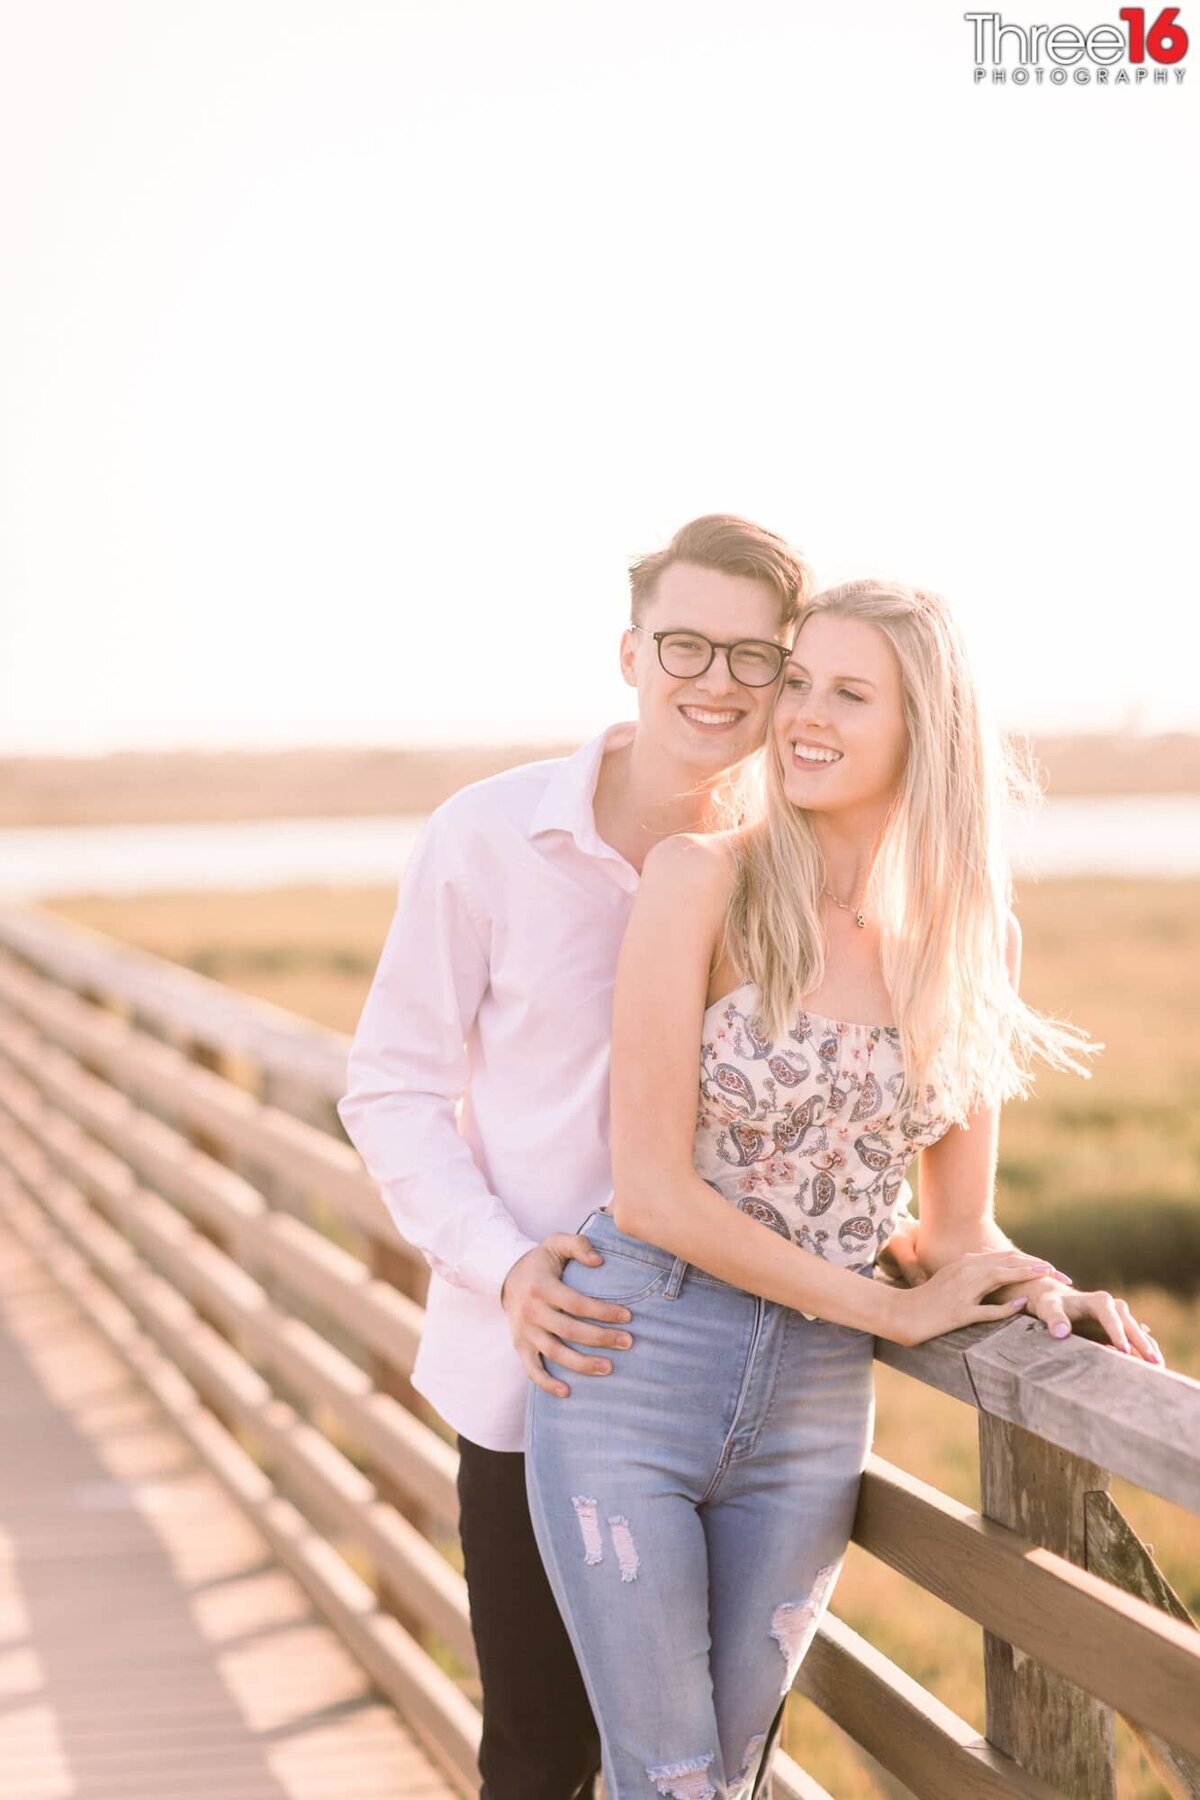 Engaged couple pose together leaning up against a ranch style fence